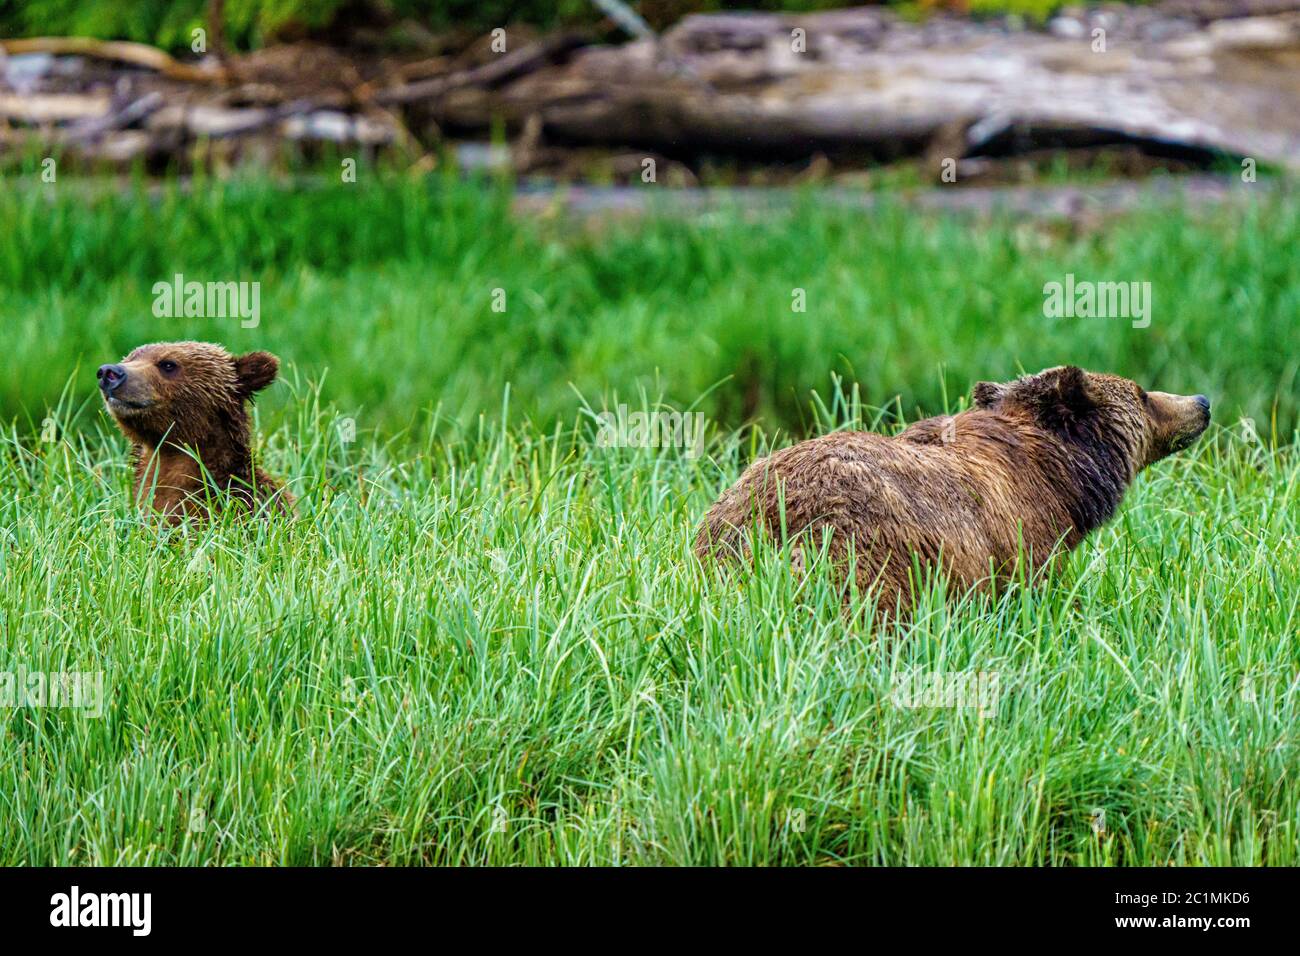 Grizzly bear mom with cub feeding in a field of sedge grass in Knight Inlet, First Nations Territory, British Columbia, Canada. Stock Photo